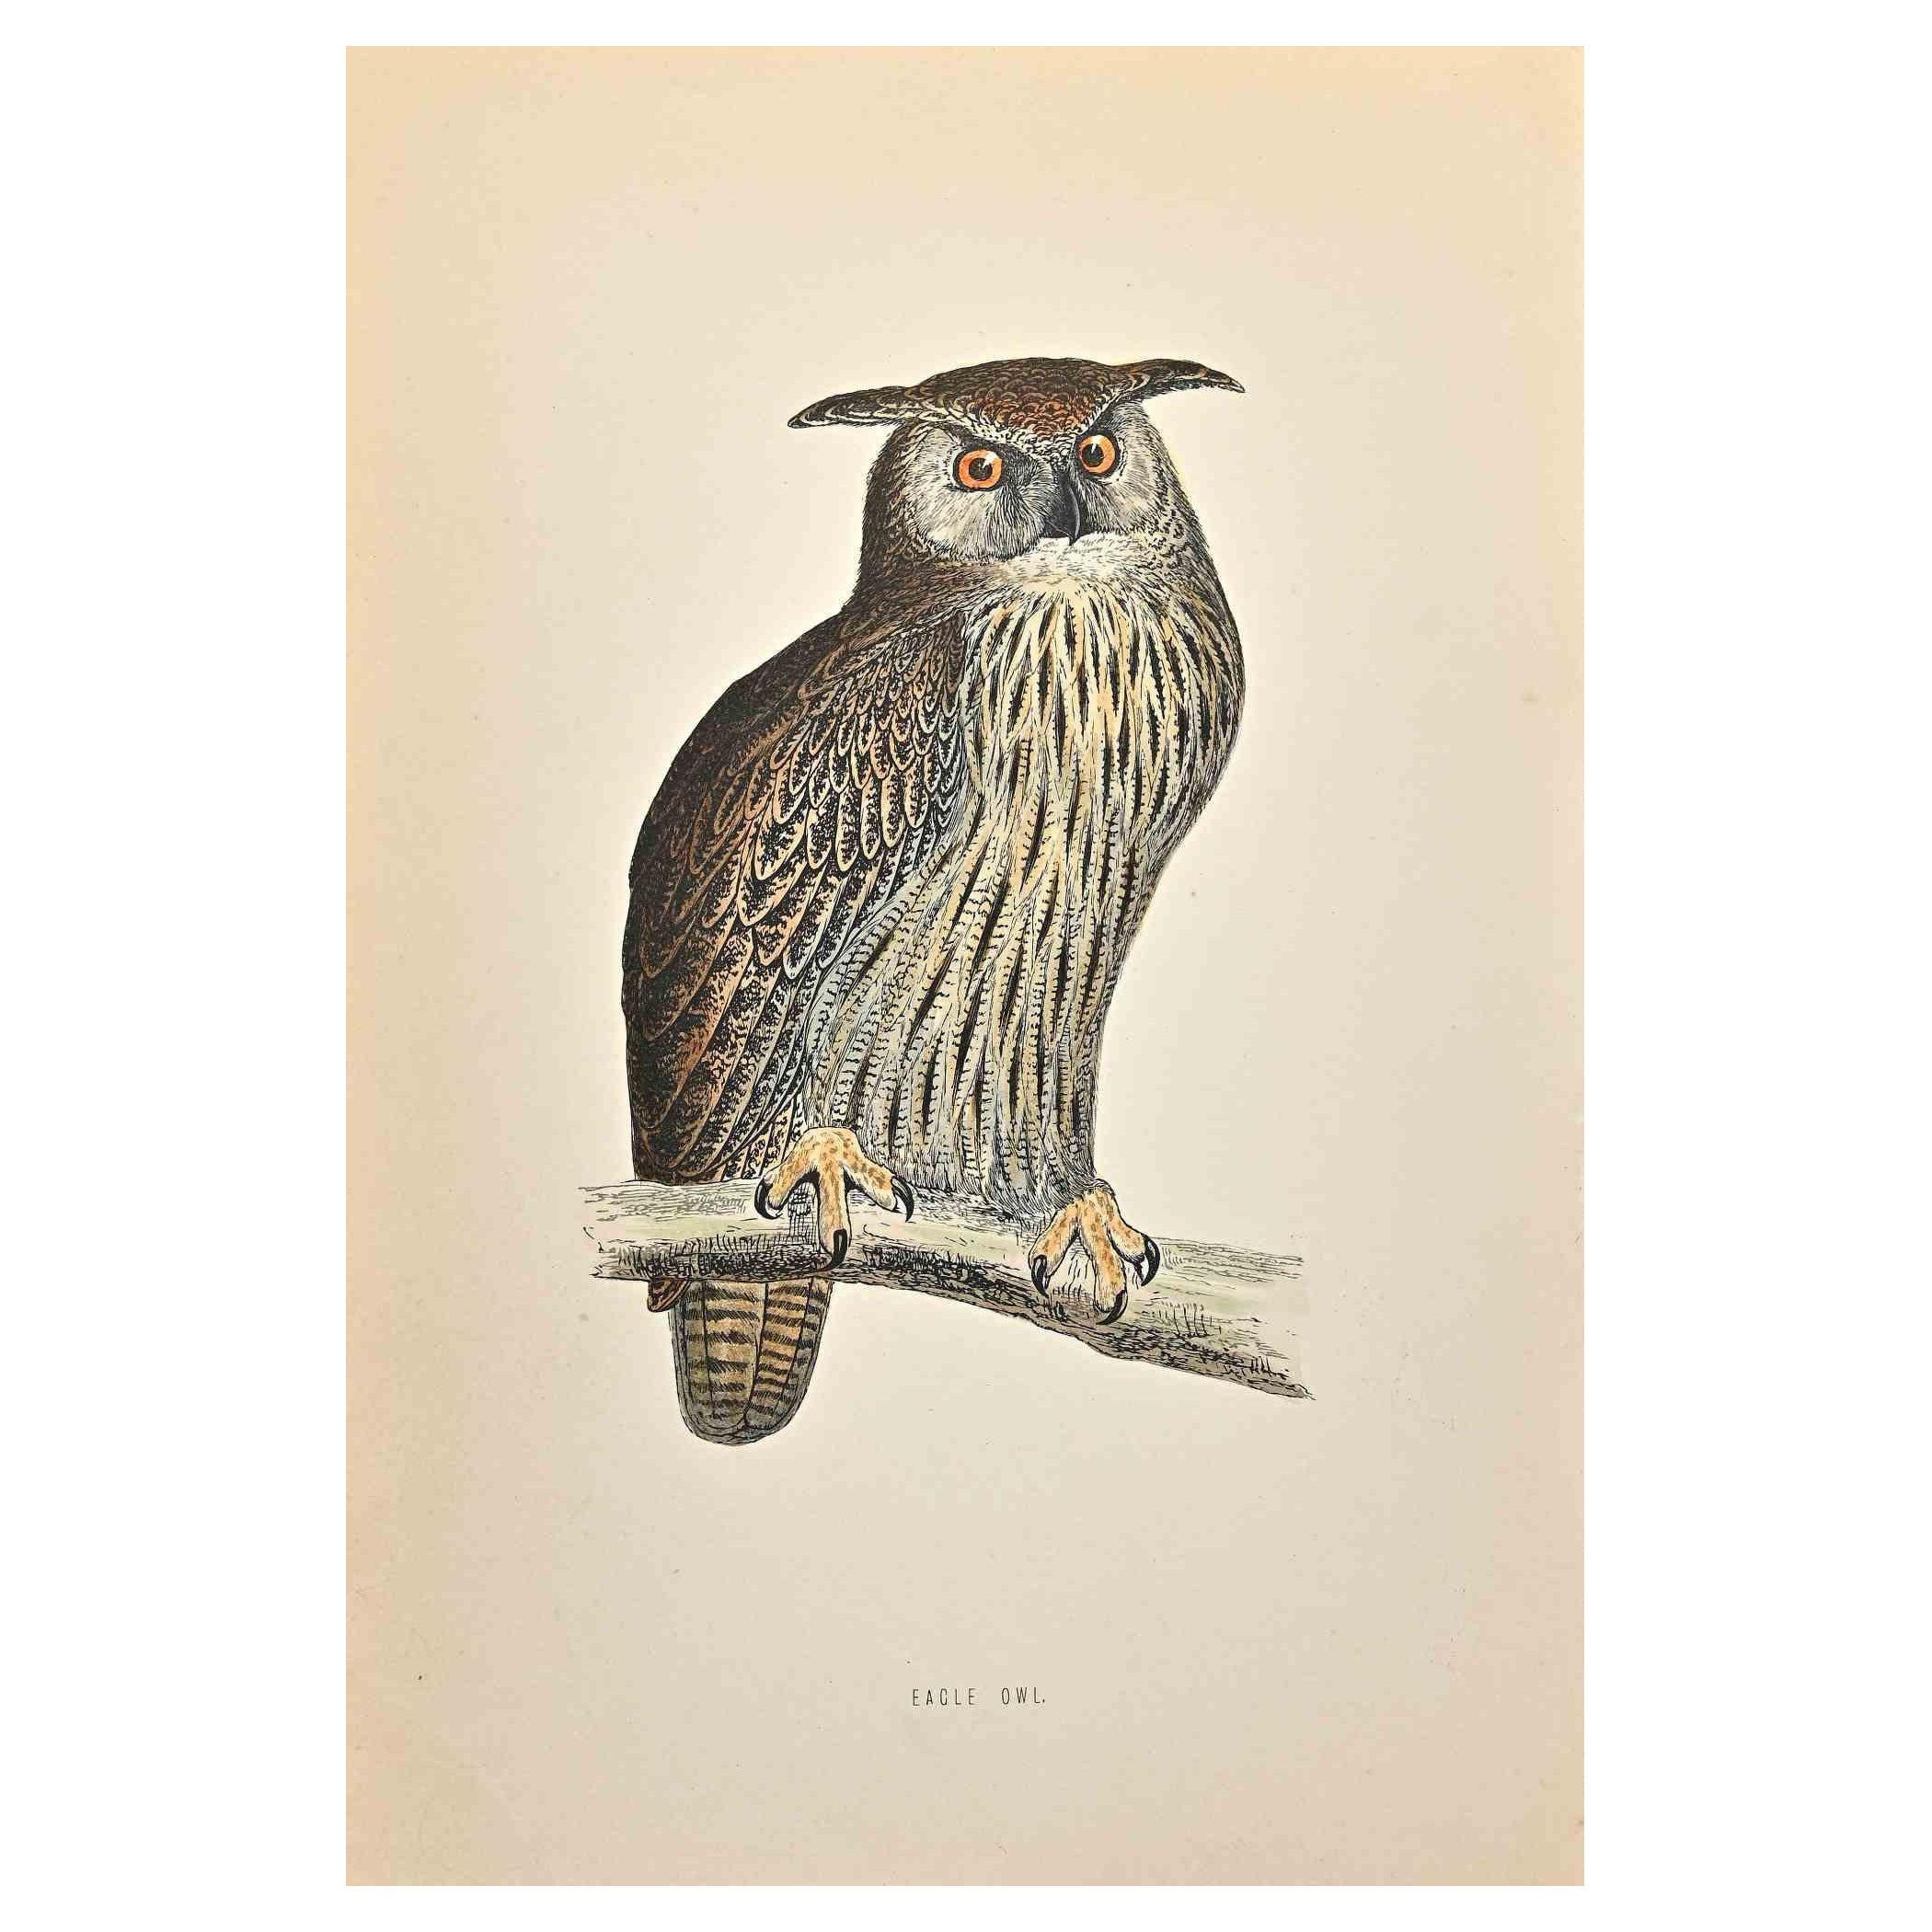 Eagle Owl is a modern artwork realized in 1870 by the British artist Alexander Francis Lydon (1836-1917) . 

Woodcut print, hand colored, published by London, Bell & Sons, 1870.  Name of the bird printed in plate. This work is part of a print suite